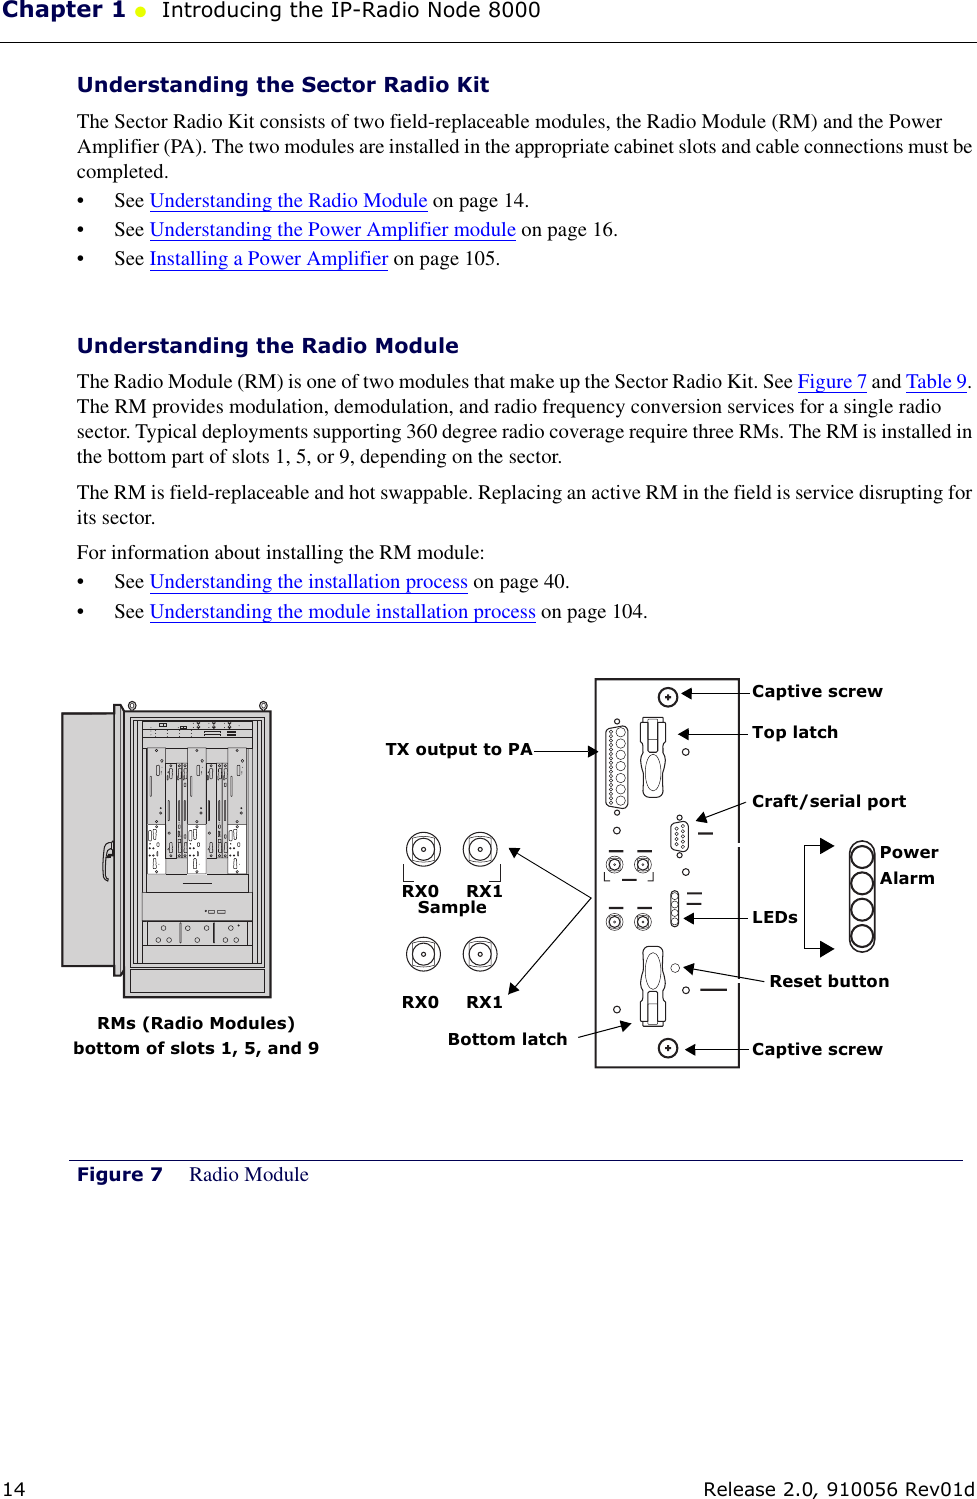 Chapter 1 ●  Introducing the IP-Radio Node 800014 Release 2.0, 910056 Rev01dUnderstanding the Sector Radio KitThe Sector Radio Kit consists of two field-replaceable modules, the Radio Module (RM) and the Power Amplifier (PA). The two modules are installed in the appropriate cabinet slots and cable connections must be completed. • See Understanding the Radio Module on page 14.• See Understanding the Power Amplifier module on page 16.• See Installing a Power Amplifier on page 105.Understanding the Radio ModuleThe Radio Module (RM) is one of two modules that make up the Sector Radio Kit. See Figure 7 and Table 9. The RM provides modulation, demodulation, and radio frequency conversion services for a single radio sector. Typical deployments supporting 360 degree radio coverage require three RMs. The RM is installed in the bottom part of slots 1, 5, or 9, depending on the sector. The RM is field-replaceable and hot swappable. Replacing an active RM in the field is service disrupting for its sector. For information about installing the RM module:• See Understanding the installation process on page 40.• See Understanding the module installation process on page 104.Figure 7 Radio ModuleTX output to PATop latch LEDsPowerAlarmSampleRX0 RX1RX0 RX1Craft/serial portCaptive screw Captive screw RMs (Radio Modules) bottom of slots 1, 5, and 9 Bottom latchReset button 